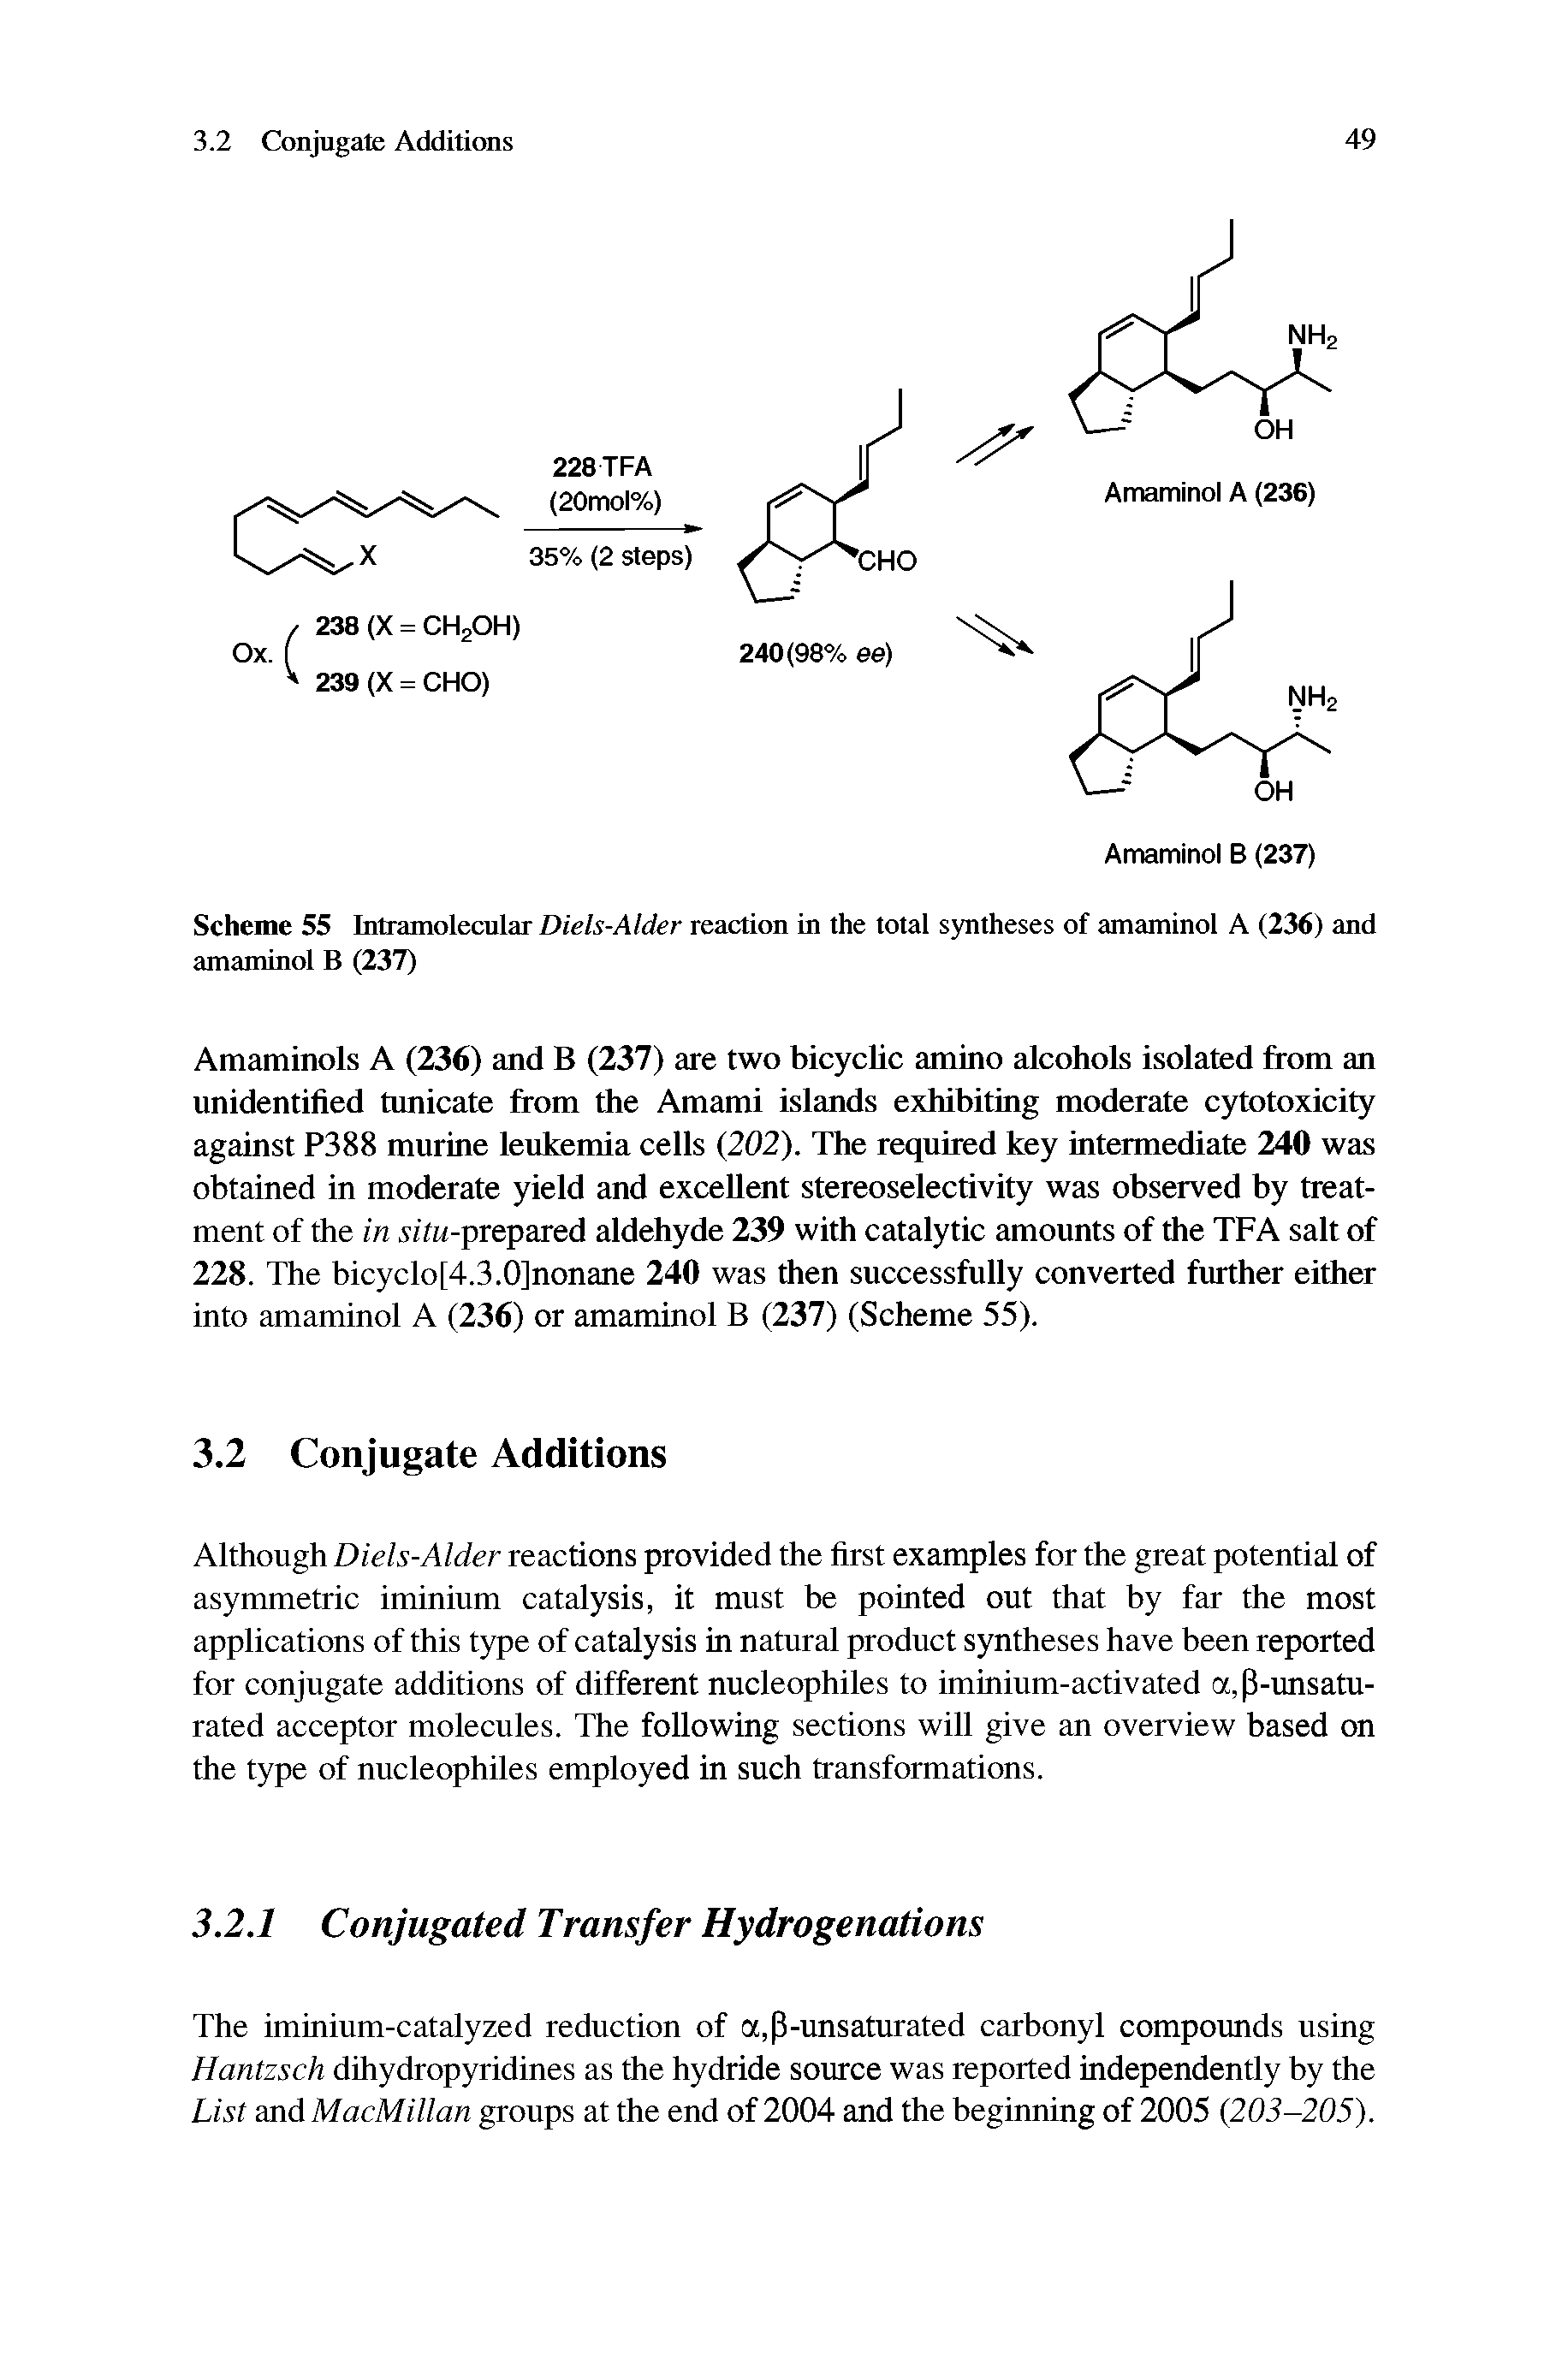 Scheme 55 Intramolecular Diels-Alder reaction in the total syntheses of amaminol A (236) and amaminol B (237)...